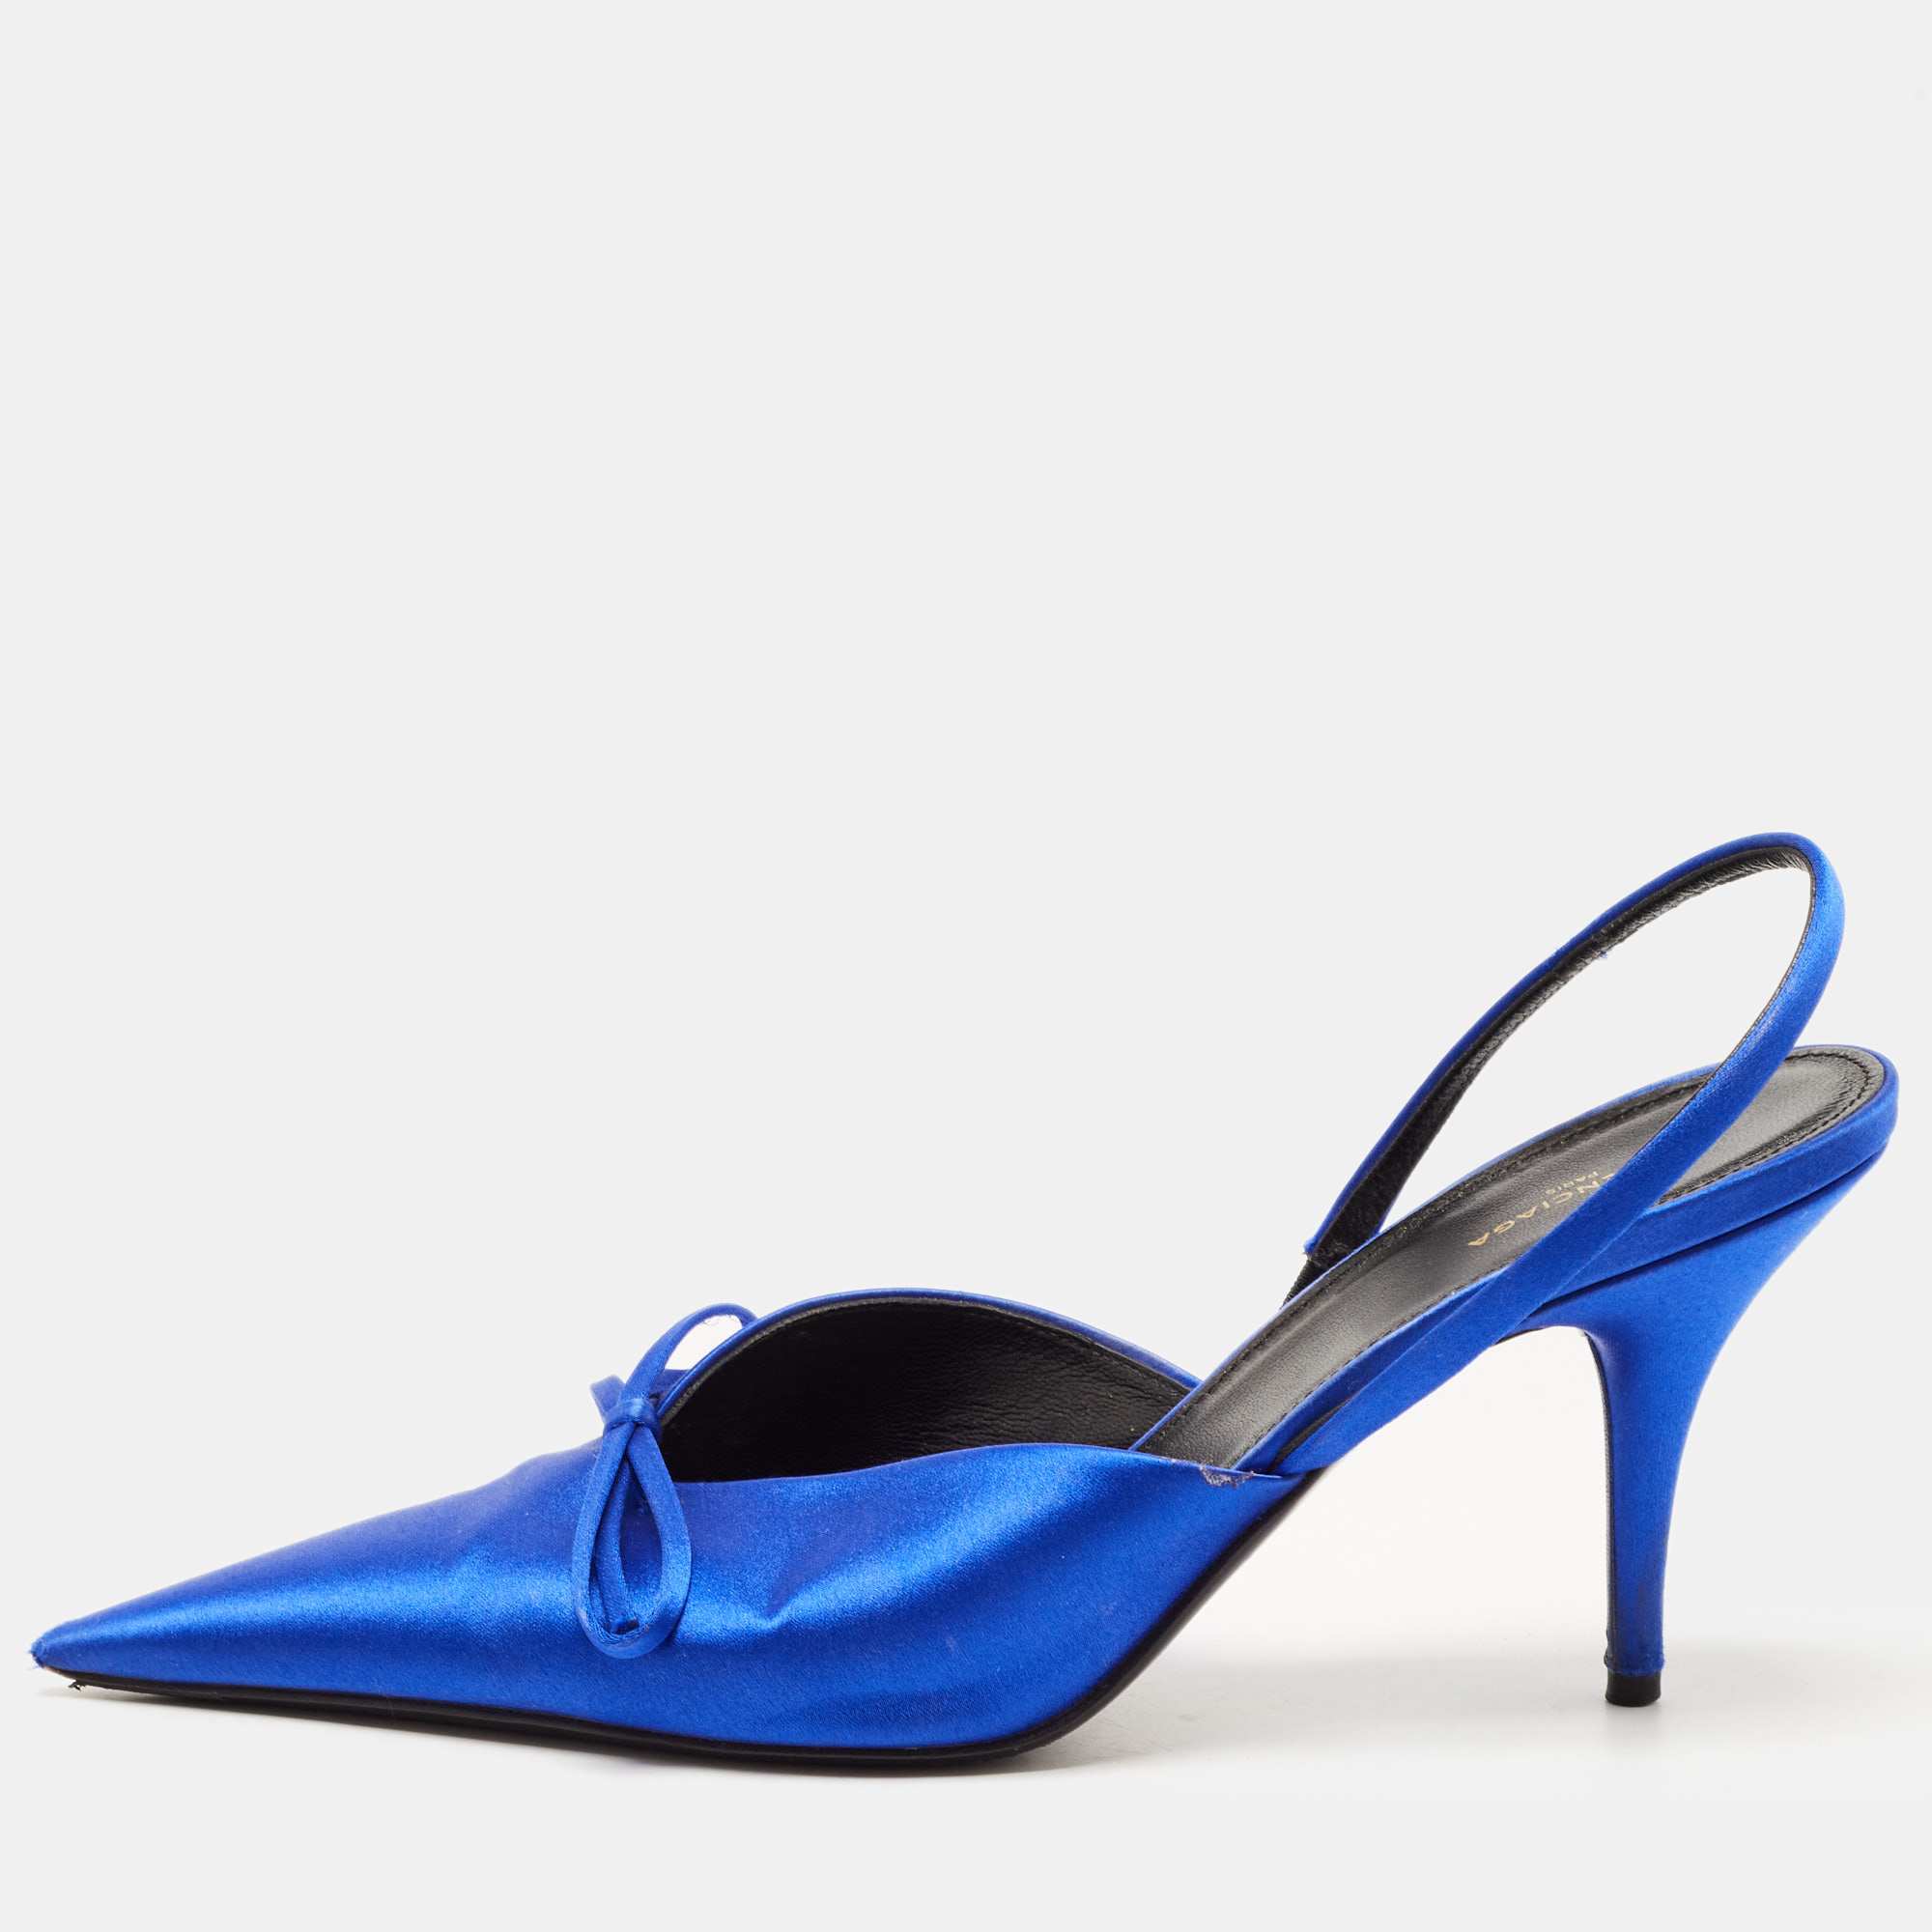 Pre-owned Balenciaga Navy Blue Satin Knife Bow Pointed Toe Slingback Pumps Size 38